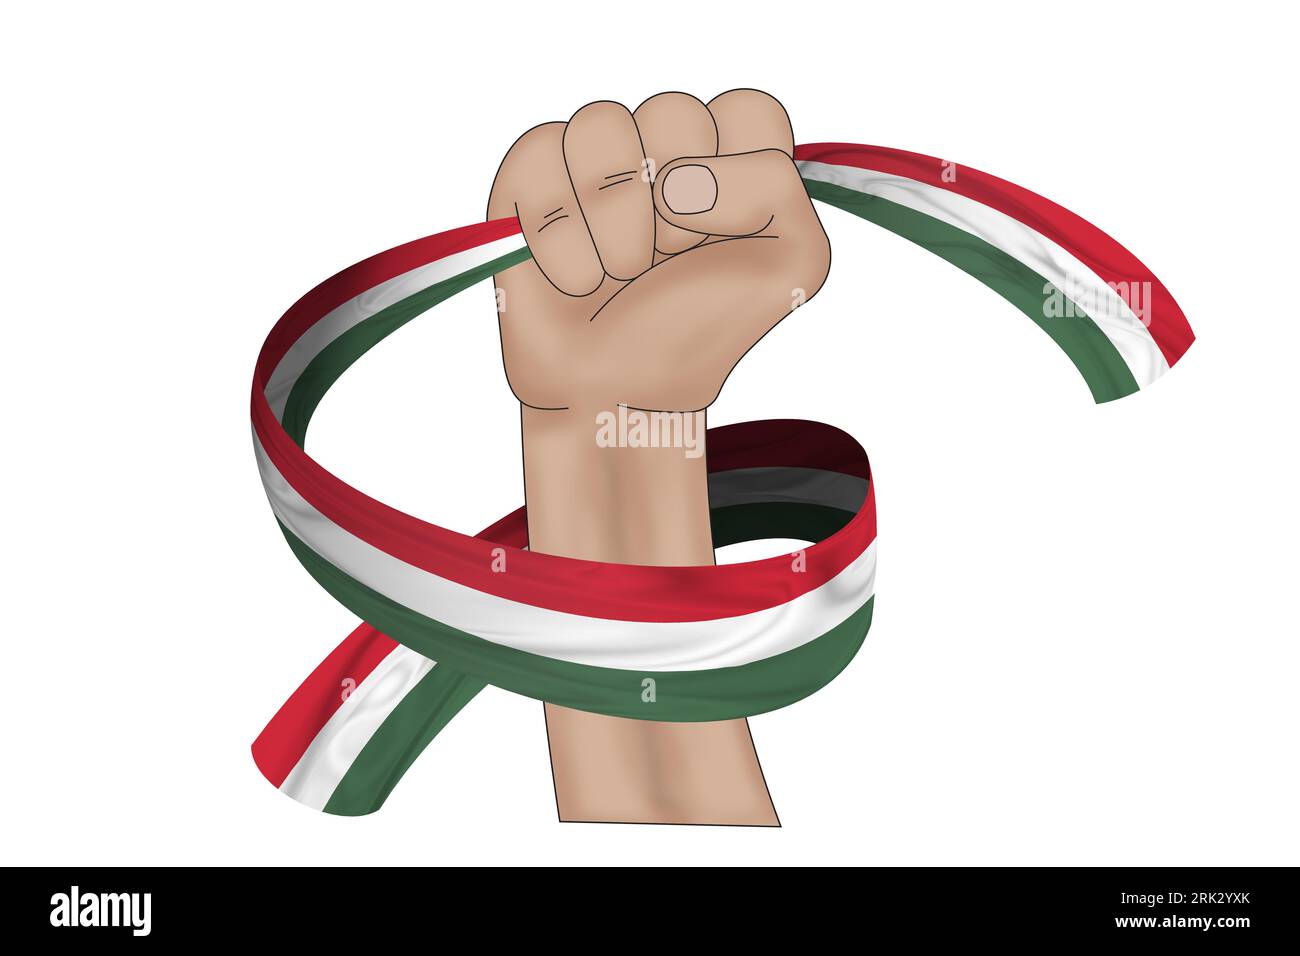 3D illustration. Hand holding flag of Hungary on a fabric ribbon background. Stock Photo